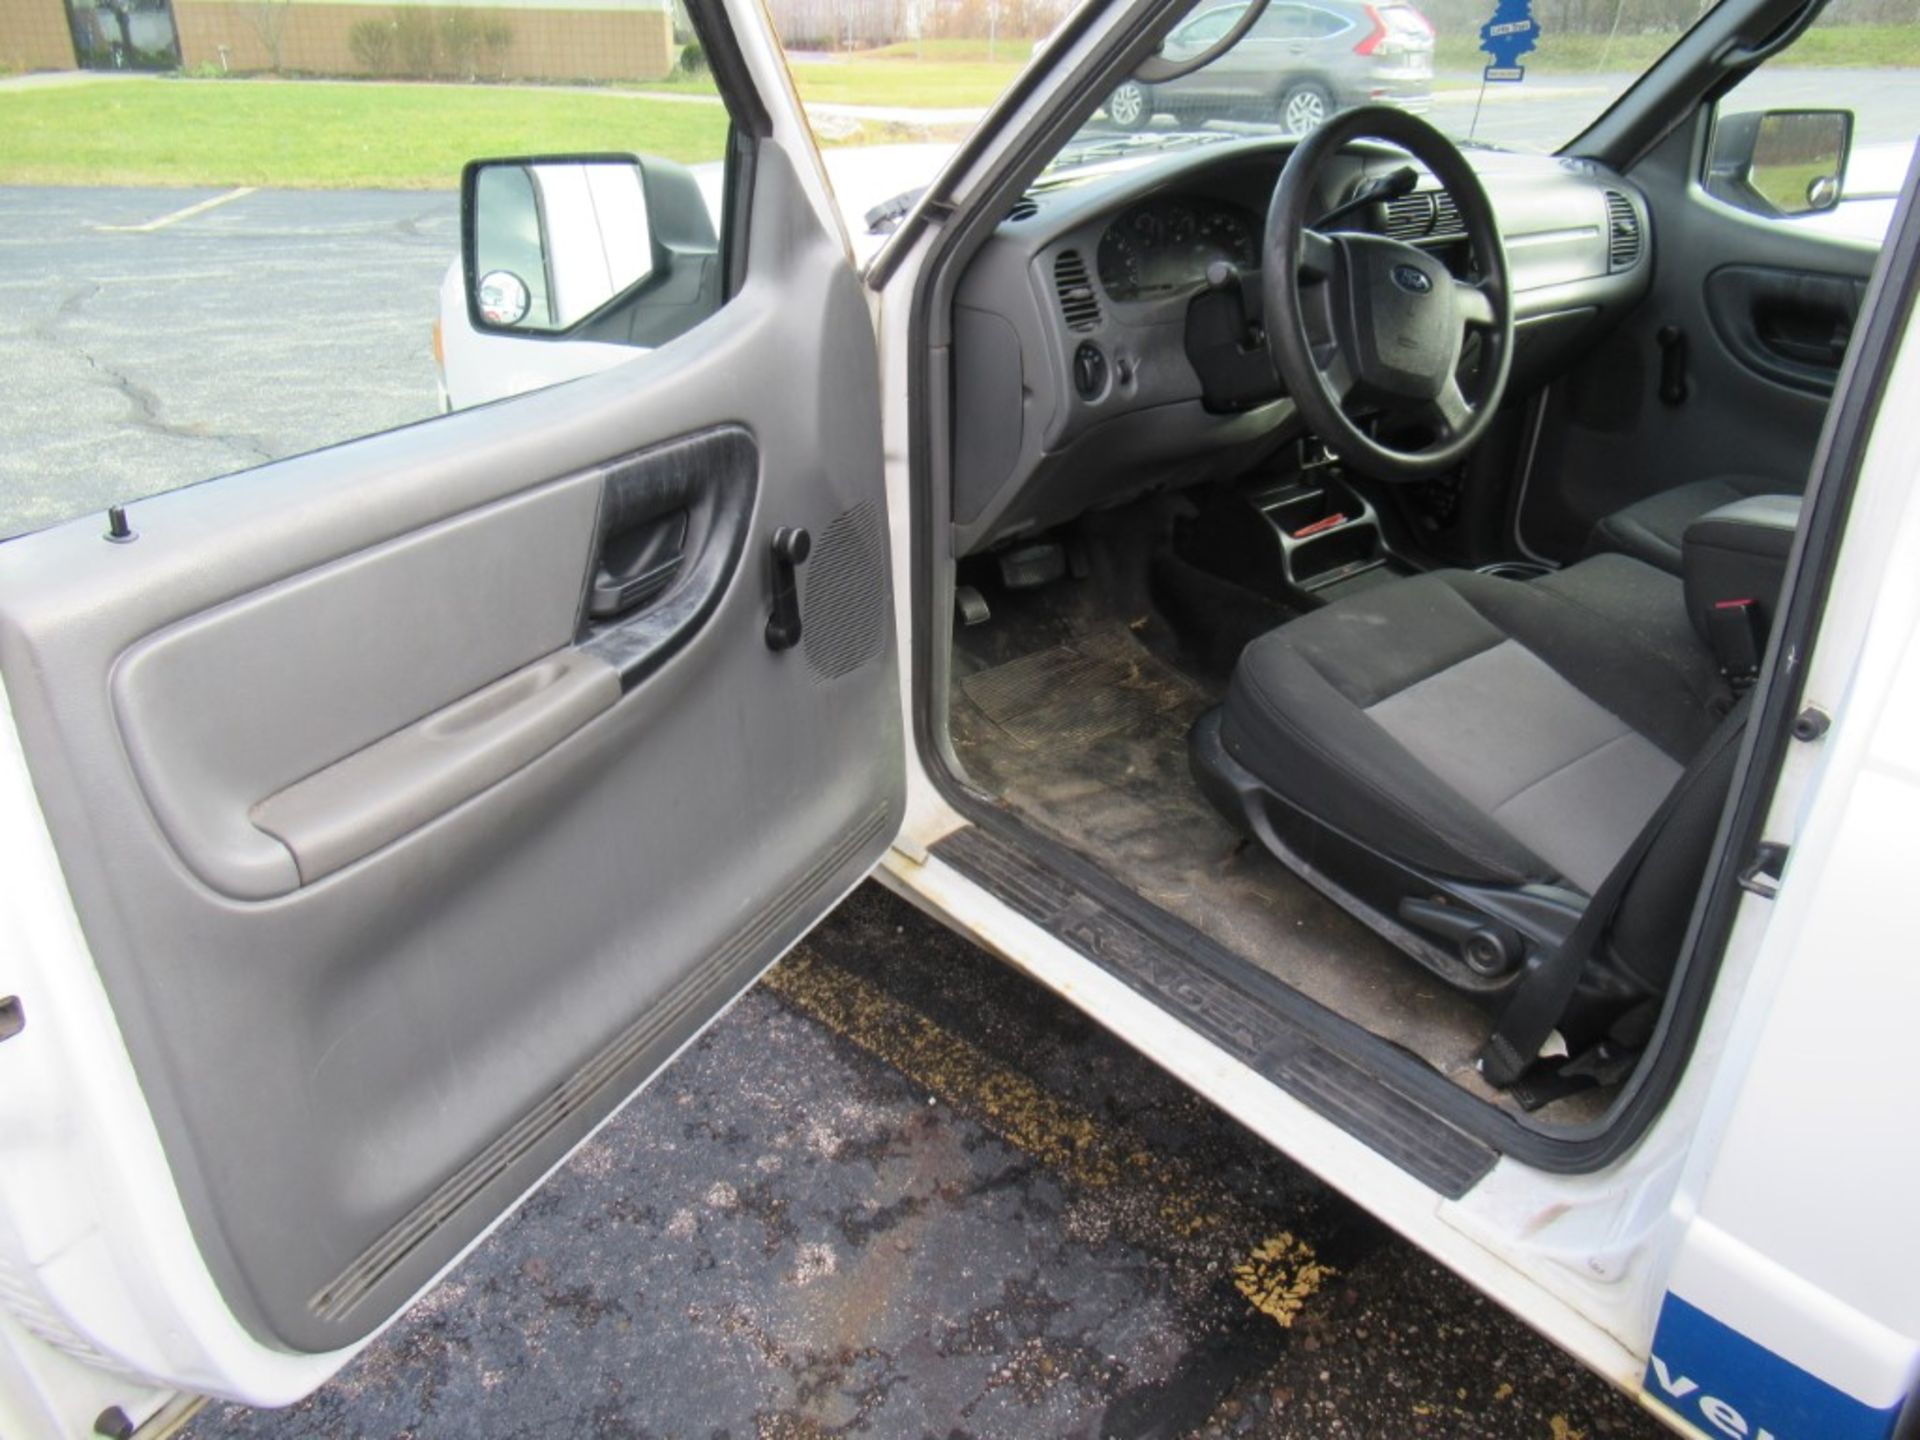 2009 Ford Ranger Pickup, VIN 1FTYR10D39PA15064, Regular Cab, Automatic, AC, AM/FM, Cap ,Started with - Image 17 of 22